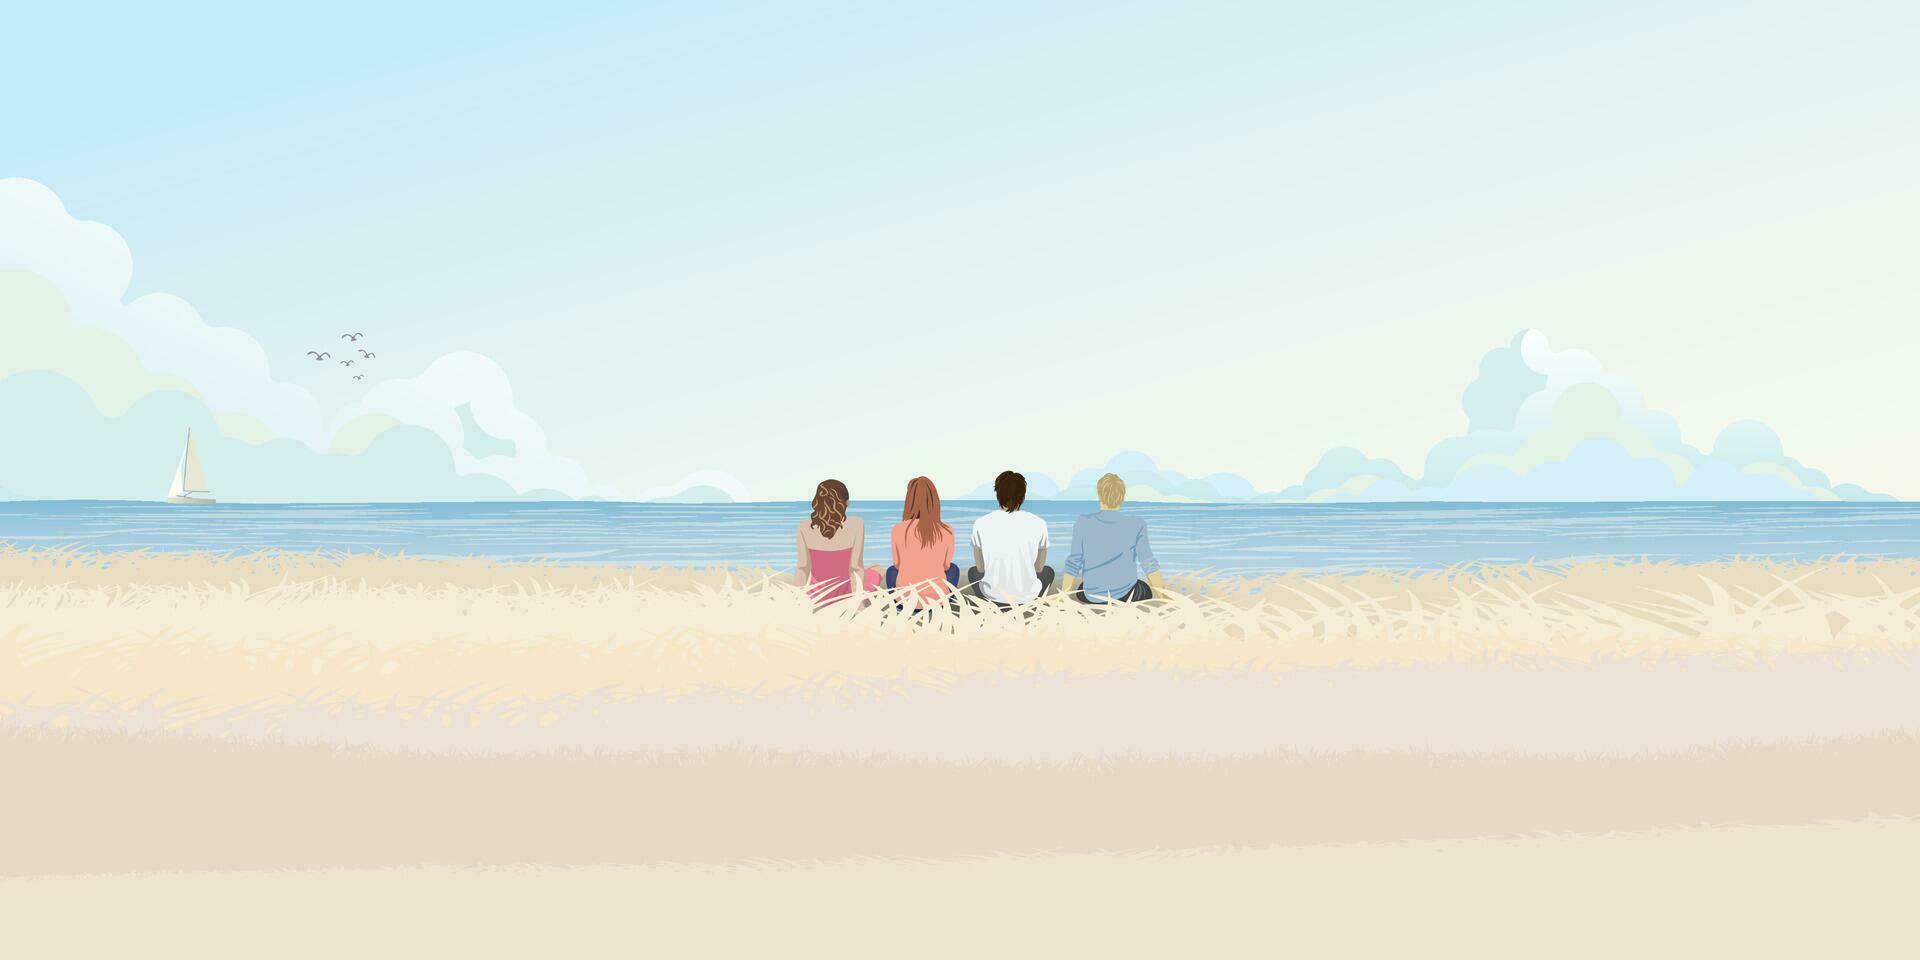 Group of friends sitting on field at coastal and tropical blue sea in autumn season vector illustration. Friendship's travelling concept flat design.